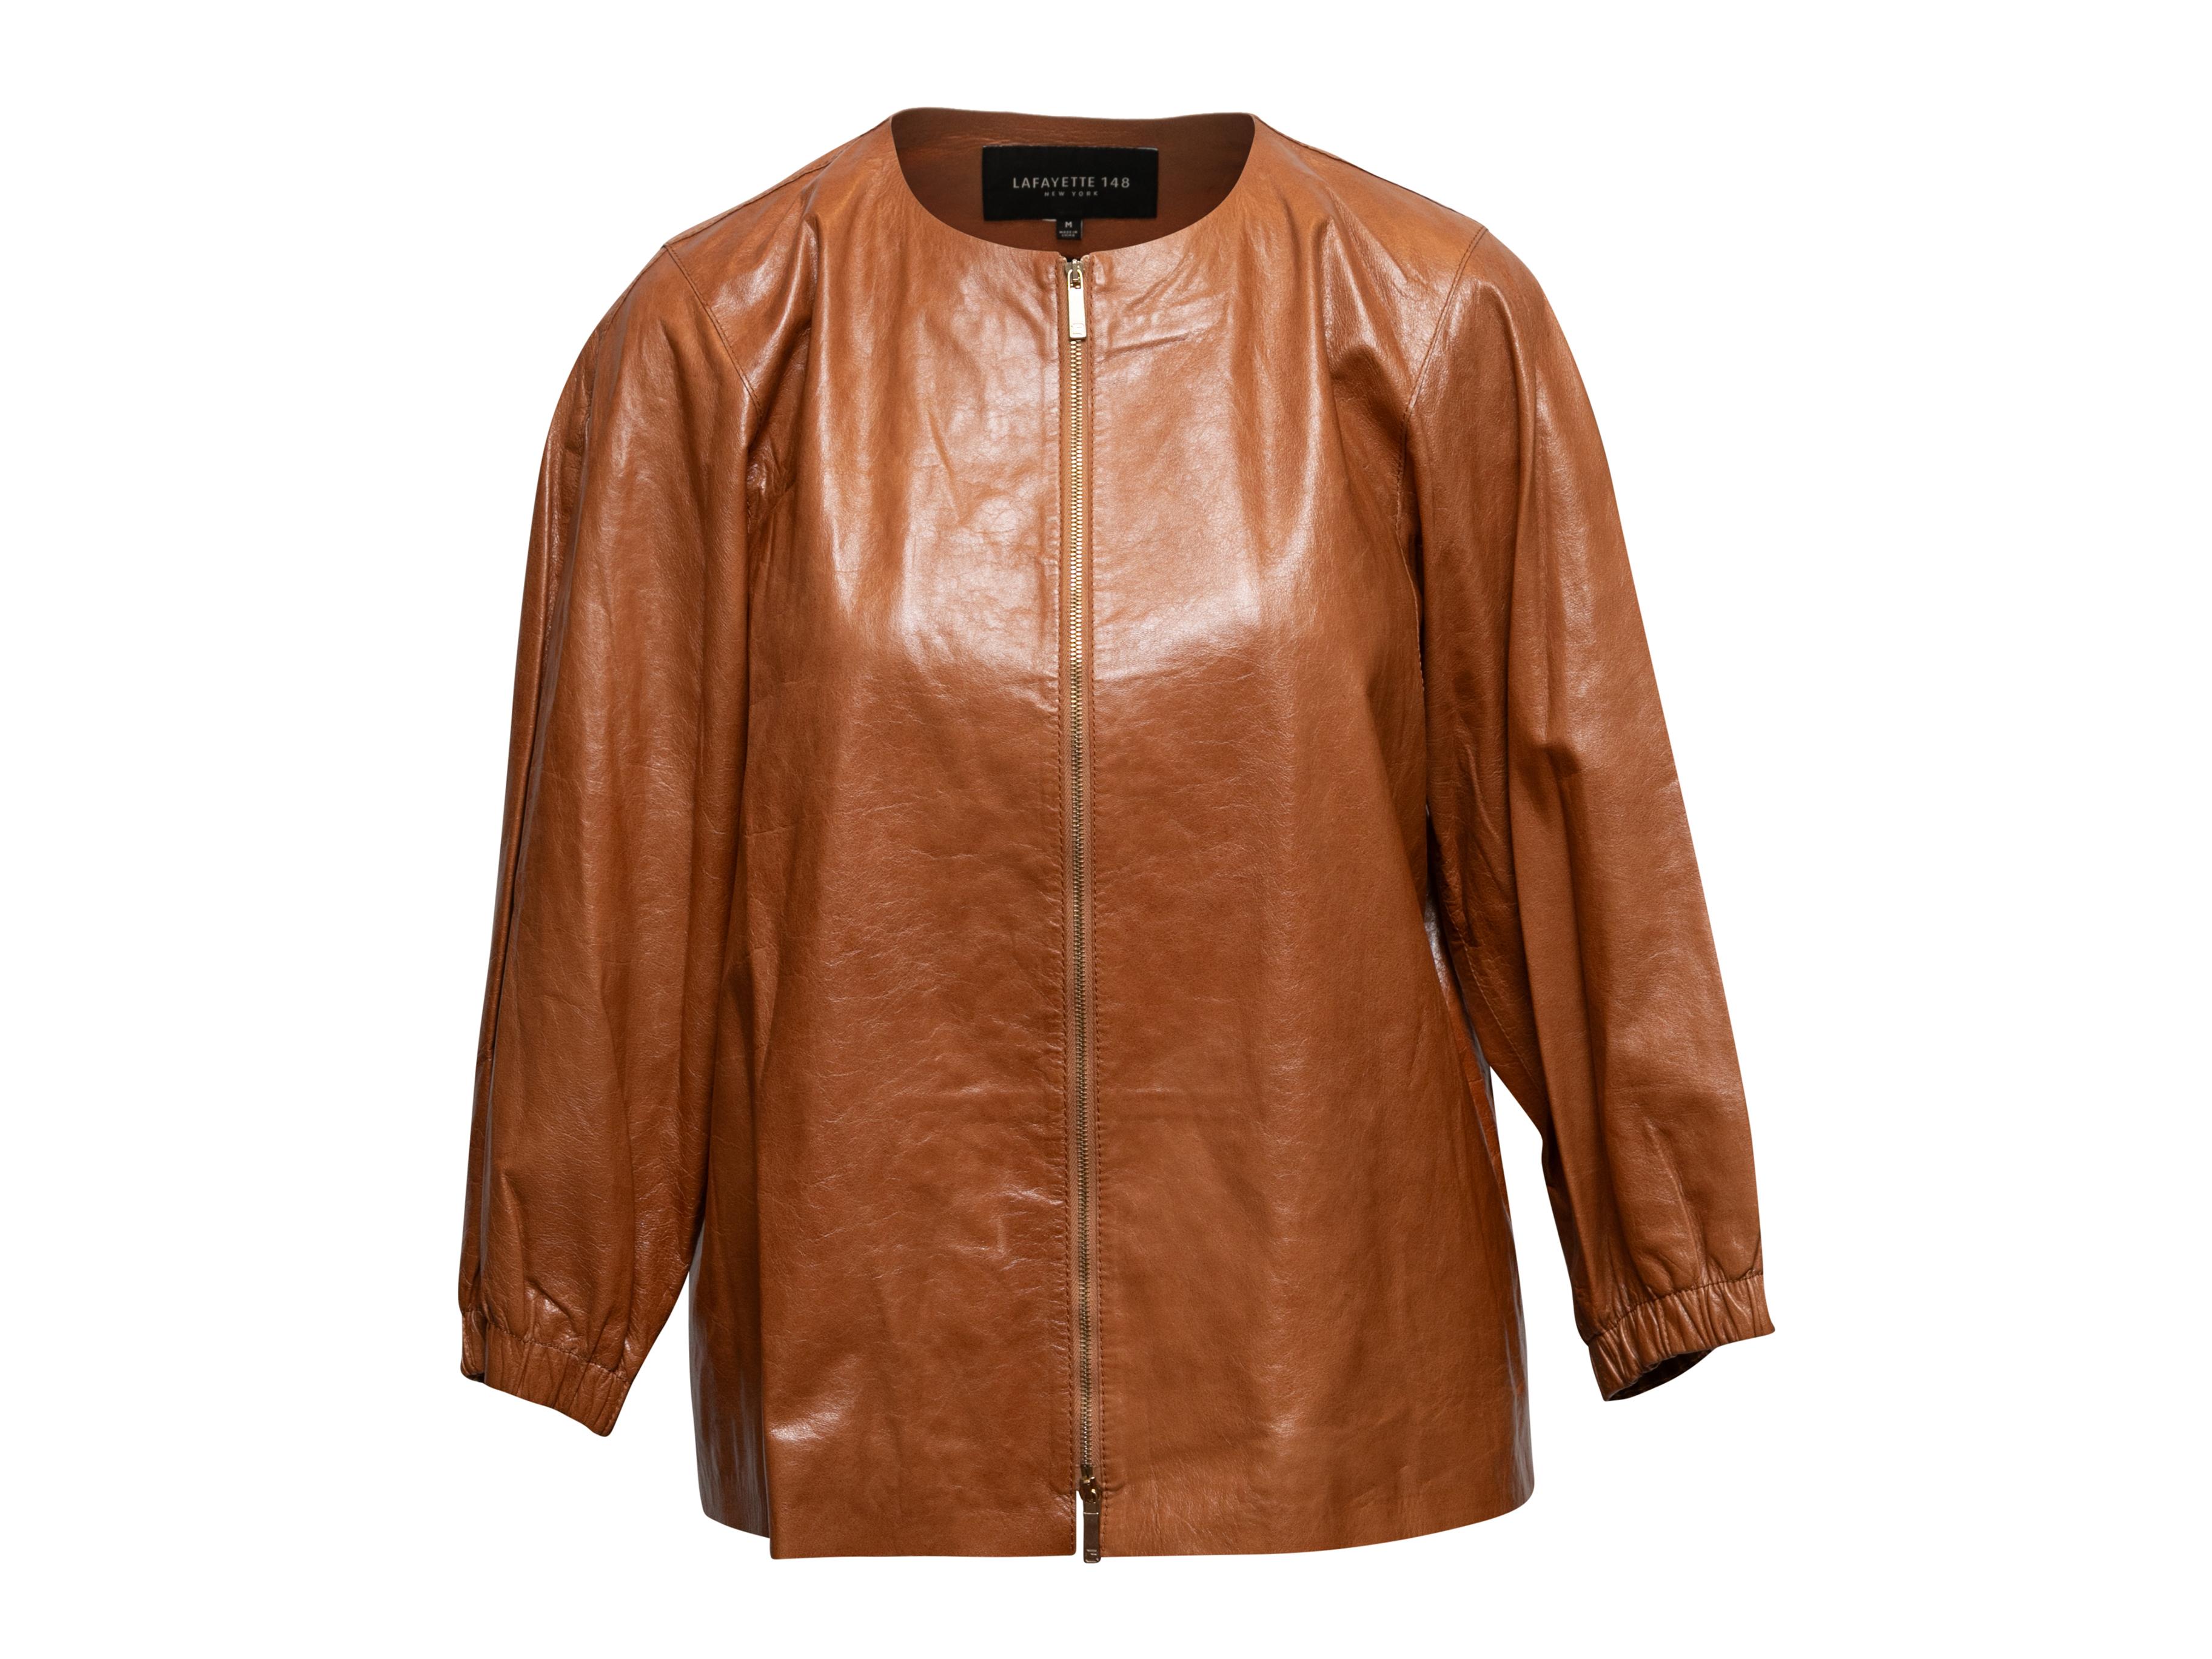 Brown leather collarless jacket by Lafayette 148. Crew neck. Zip closure at center front. 40